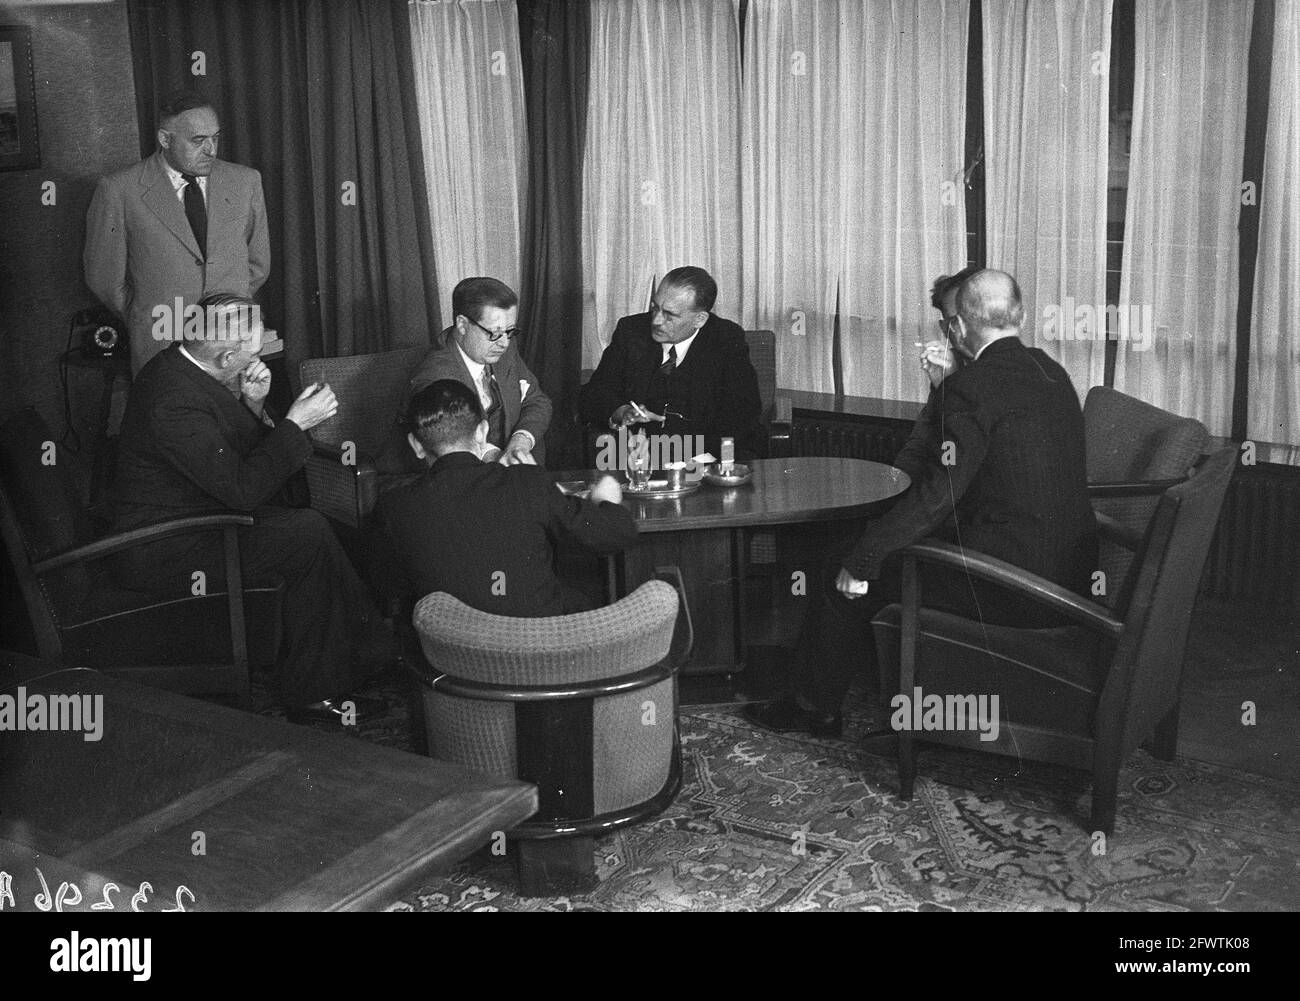 Signing of Belgian-Dutch Treaty on Mutuality of Social Insurance. Minister Drees with Belgian Minister L.E. Troclet and officials for the signing, 29 August 1947, international agreements, ministers, The Netherlands, 20th century press agency photo, news to remember, documentary, historic photography 1945-1990, visual stories, human history of the Twentieth Century, capturing moments in time Stock Photo